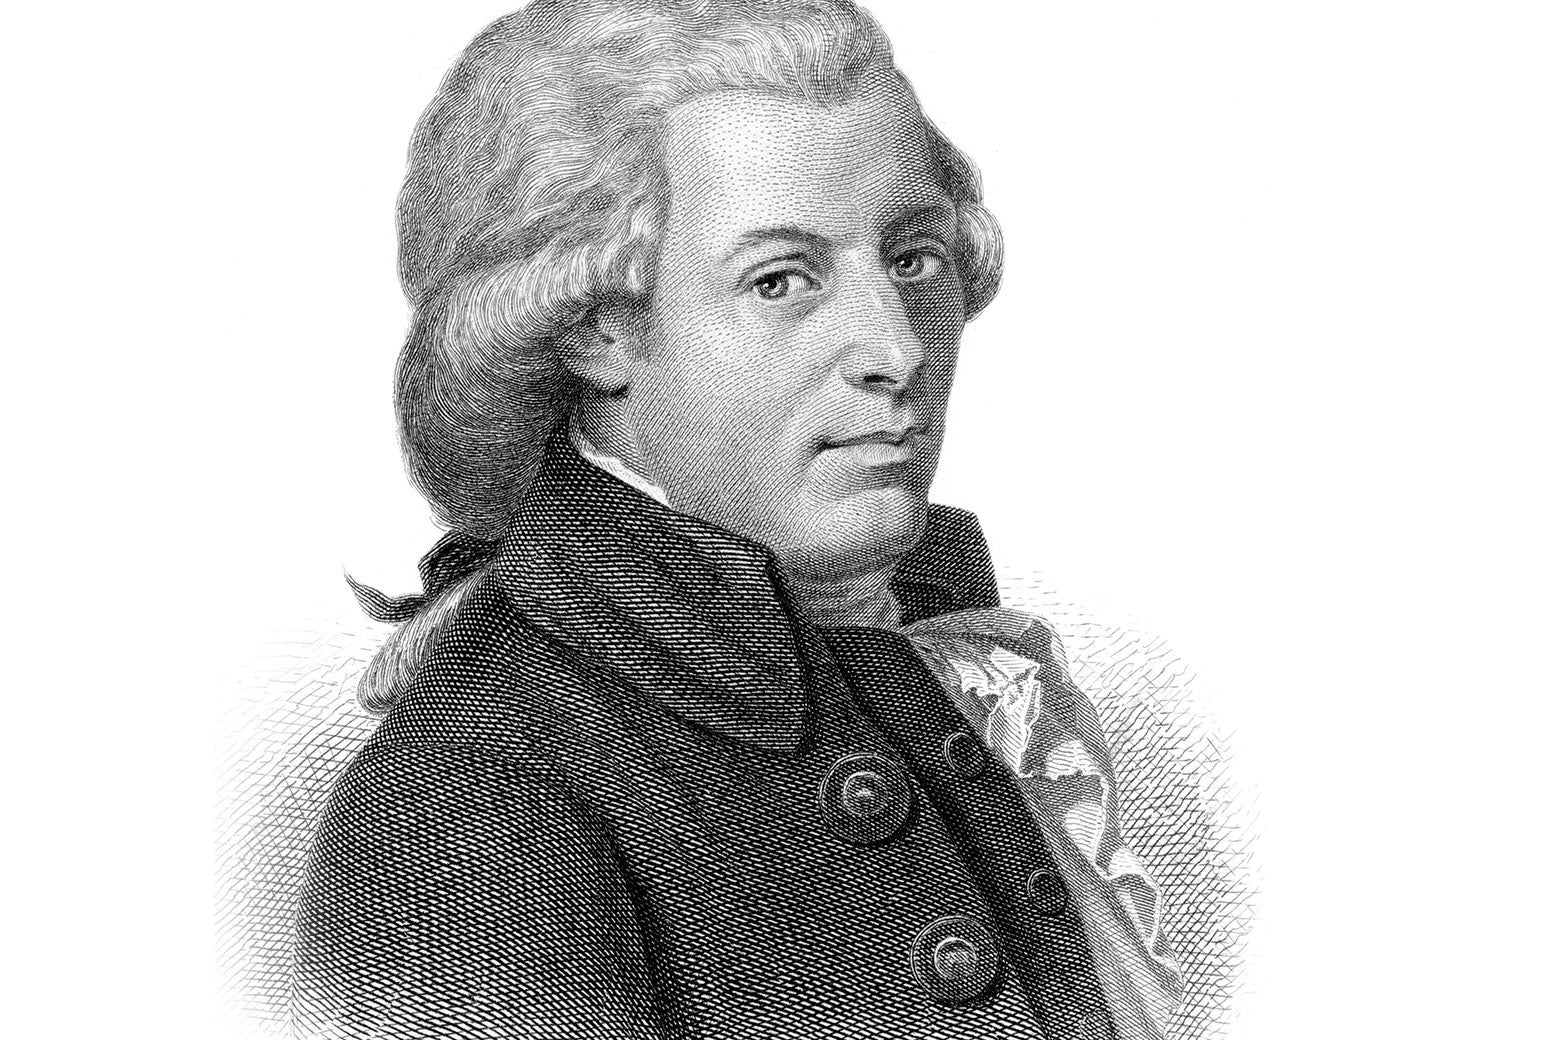 It's an illustration of Wolfgang Amadeus Mozart